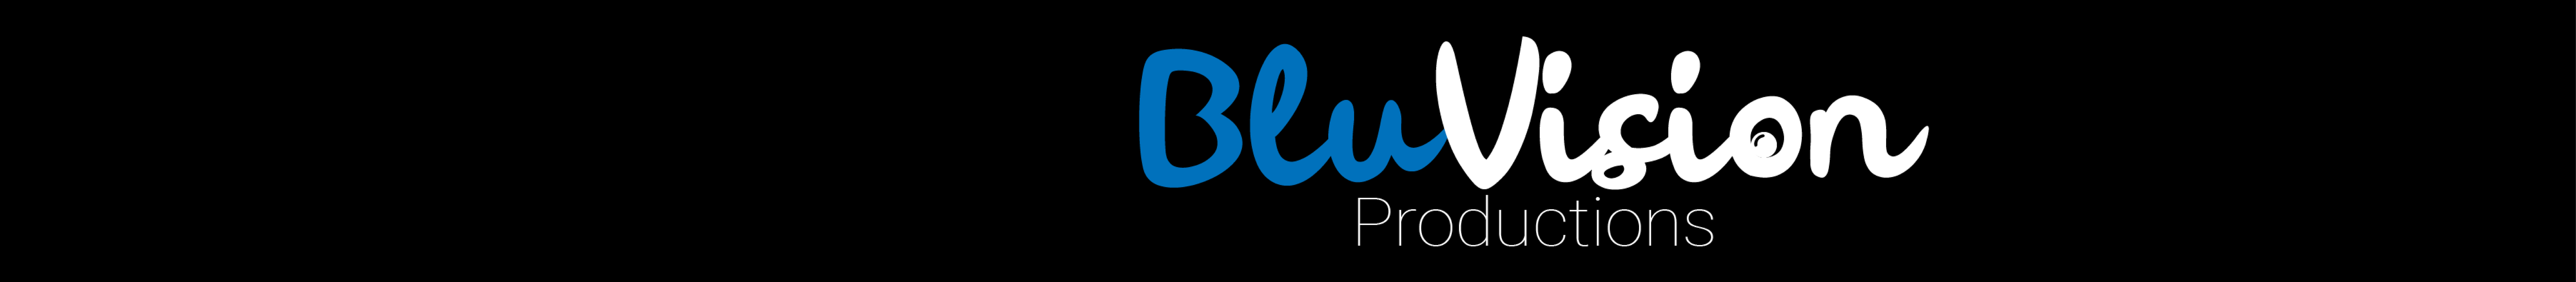 BluVision Productions's profile banner